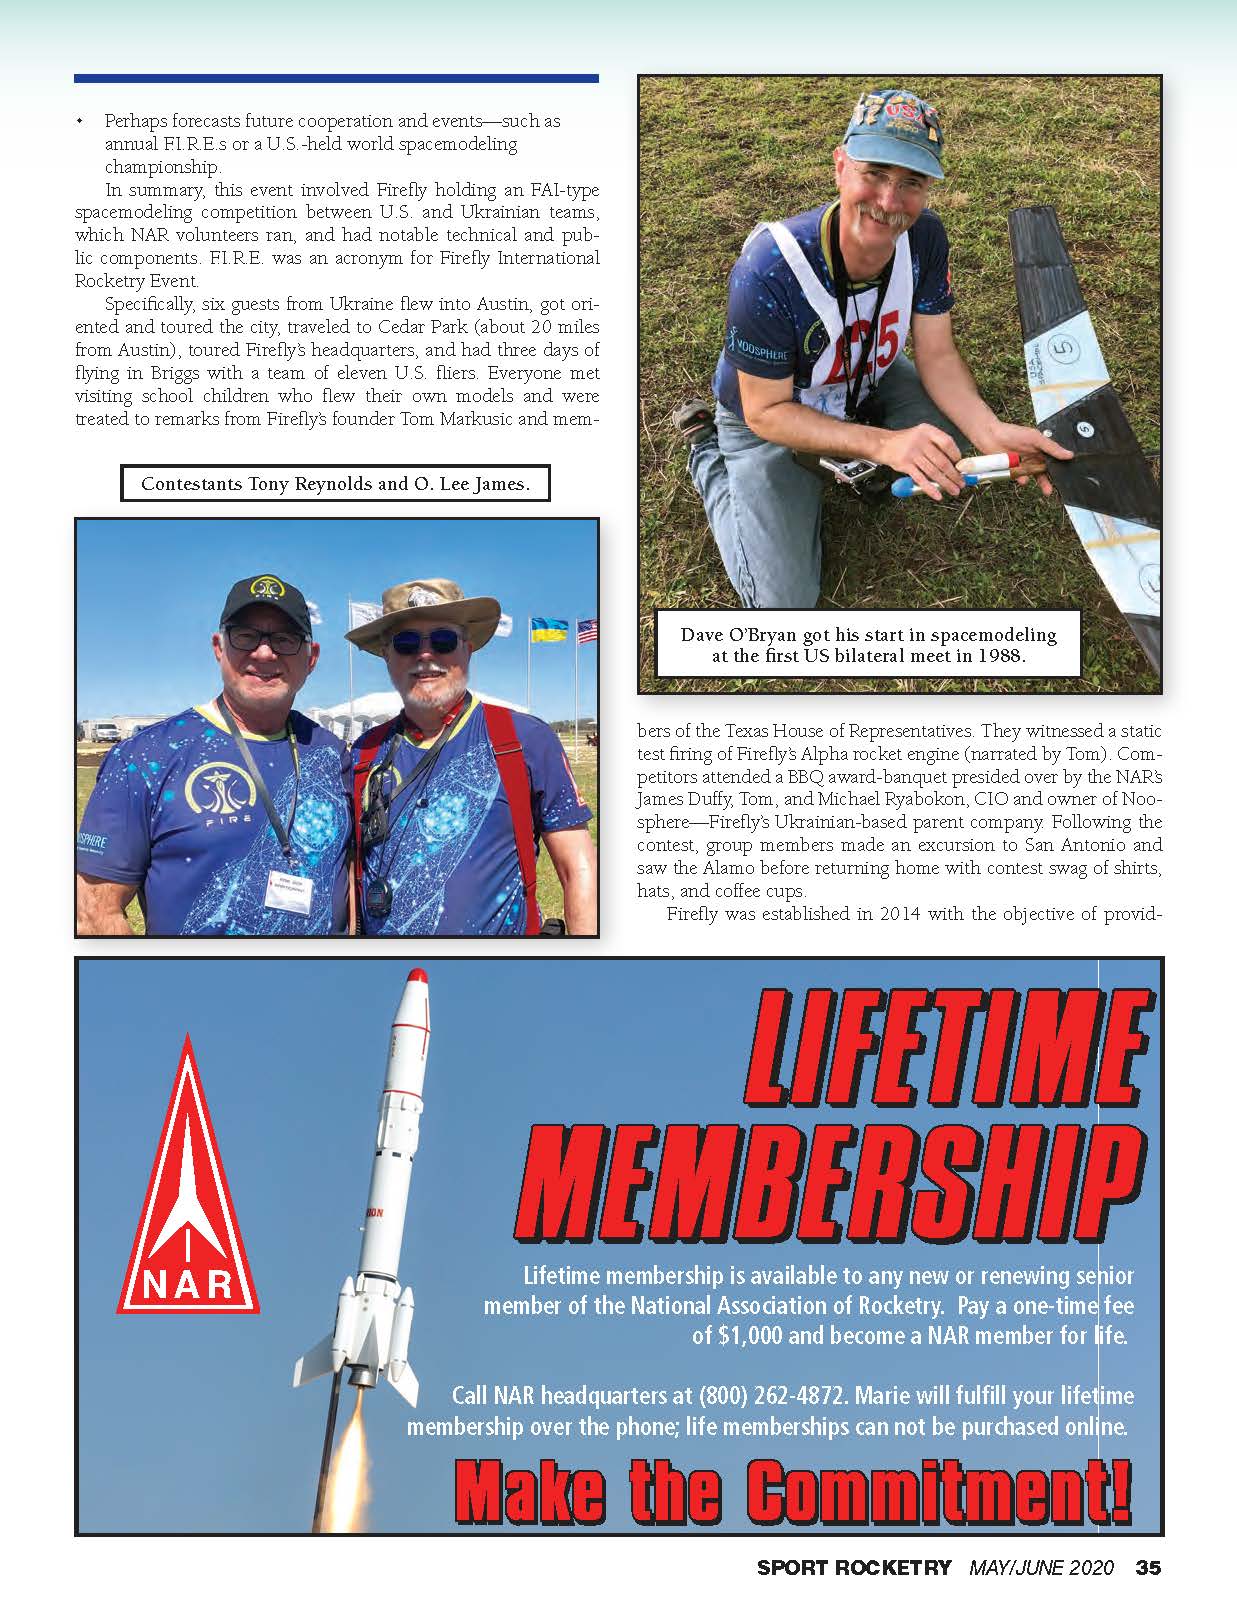 Sport_Rocketry_Magazine_FIRE-2019-Article_Page_4